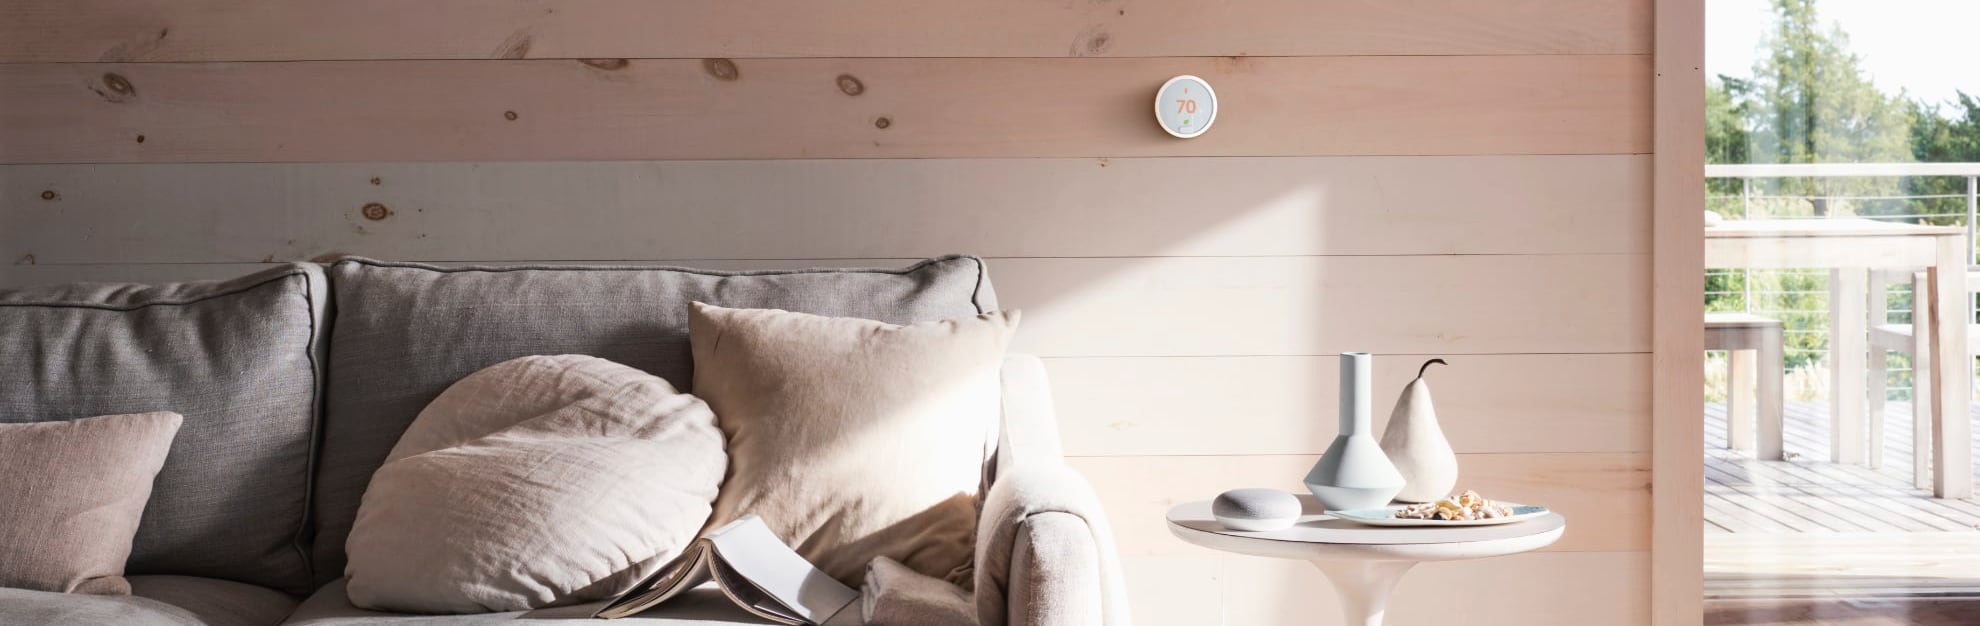 Vivint Home Automation in Florence